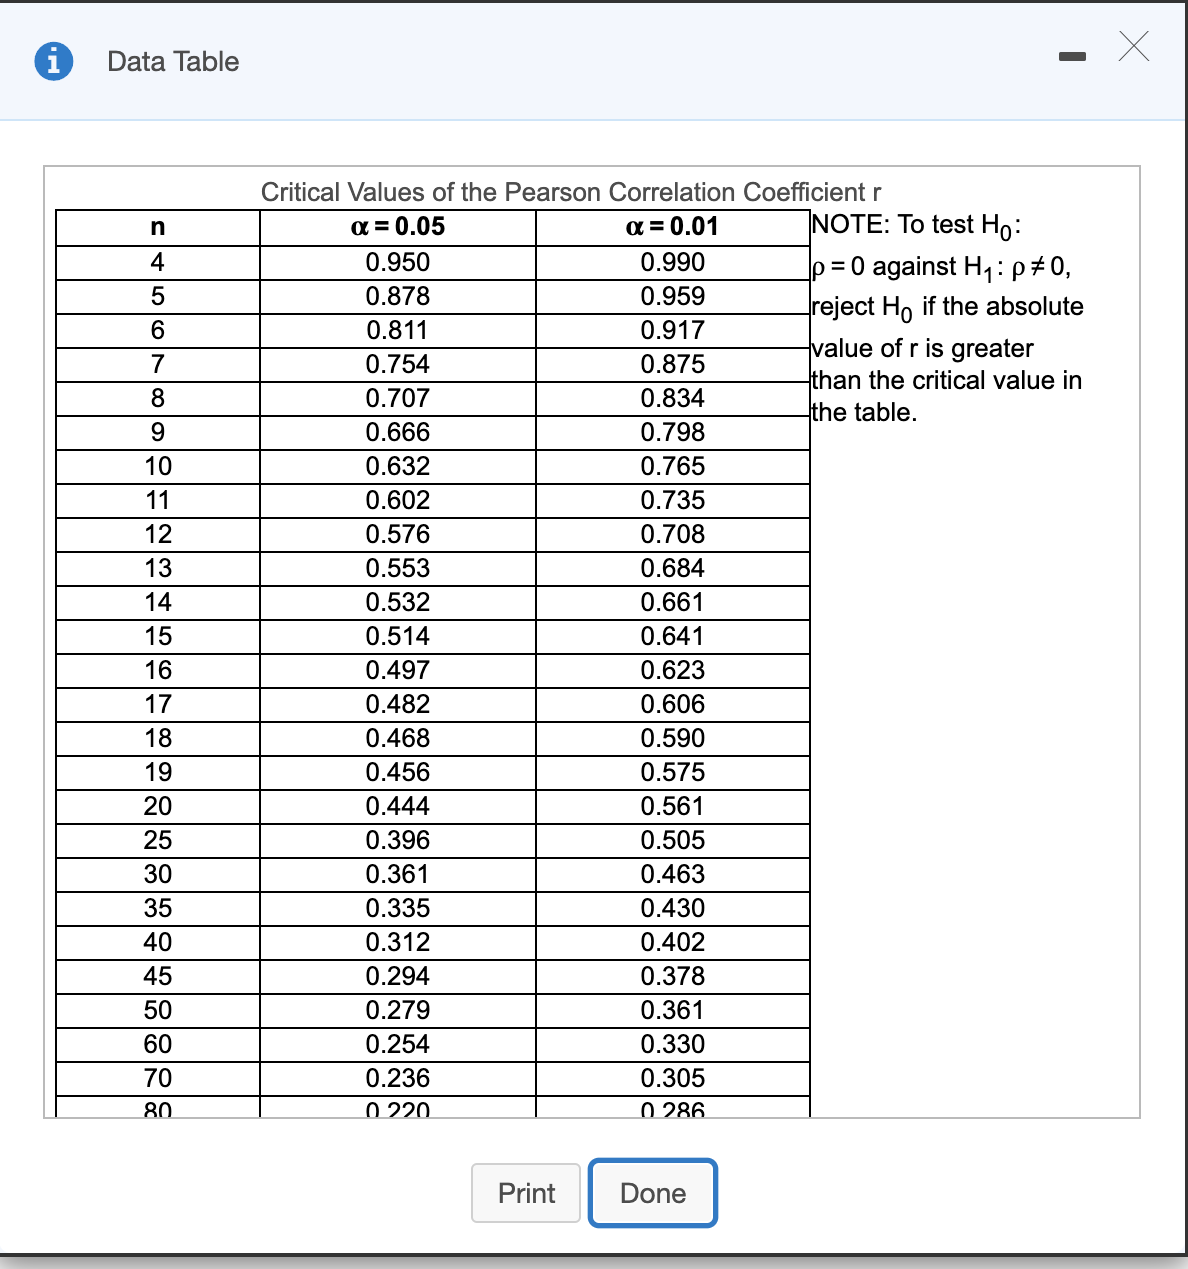 Data Table
Critical Values of the Pearson Correlation Coefficientr
a = 0.05
a = 0.01
NOTE: To test Ho:
4
0.950
0.990
p = 0 against H1:p#0,
0.878
0.959
reject Ho if the absolute
value of r is greater
than the critical value in
the table.
0.811
0.917
0.754
0.875
0.707
0.834
0.666
0.798
10
0.632
0.765
11
0.602
0.735
12
0.576
0.708
13
0.553
0.684
14
0.532
0.661
15
0.514
0.641
16
0.497
0.623
17
0.482
0.606
18
0.468
0.590
19
0.456
0.575
20
0.444
0.561
25
0.396
0.505
30
0.361
0.463
35
0.335
0.430
40
0.312
0.402
45
0.294
0.378
50
0.279
0.361
60
0.254
0.330
70
0.236
0.305
80
0 220.
0 286.
Print
Done
